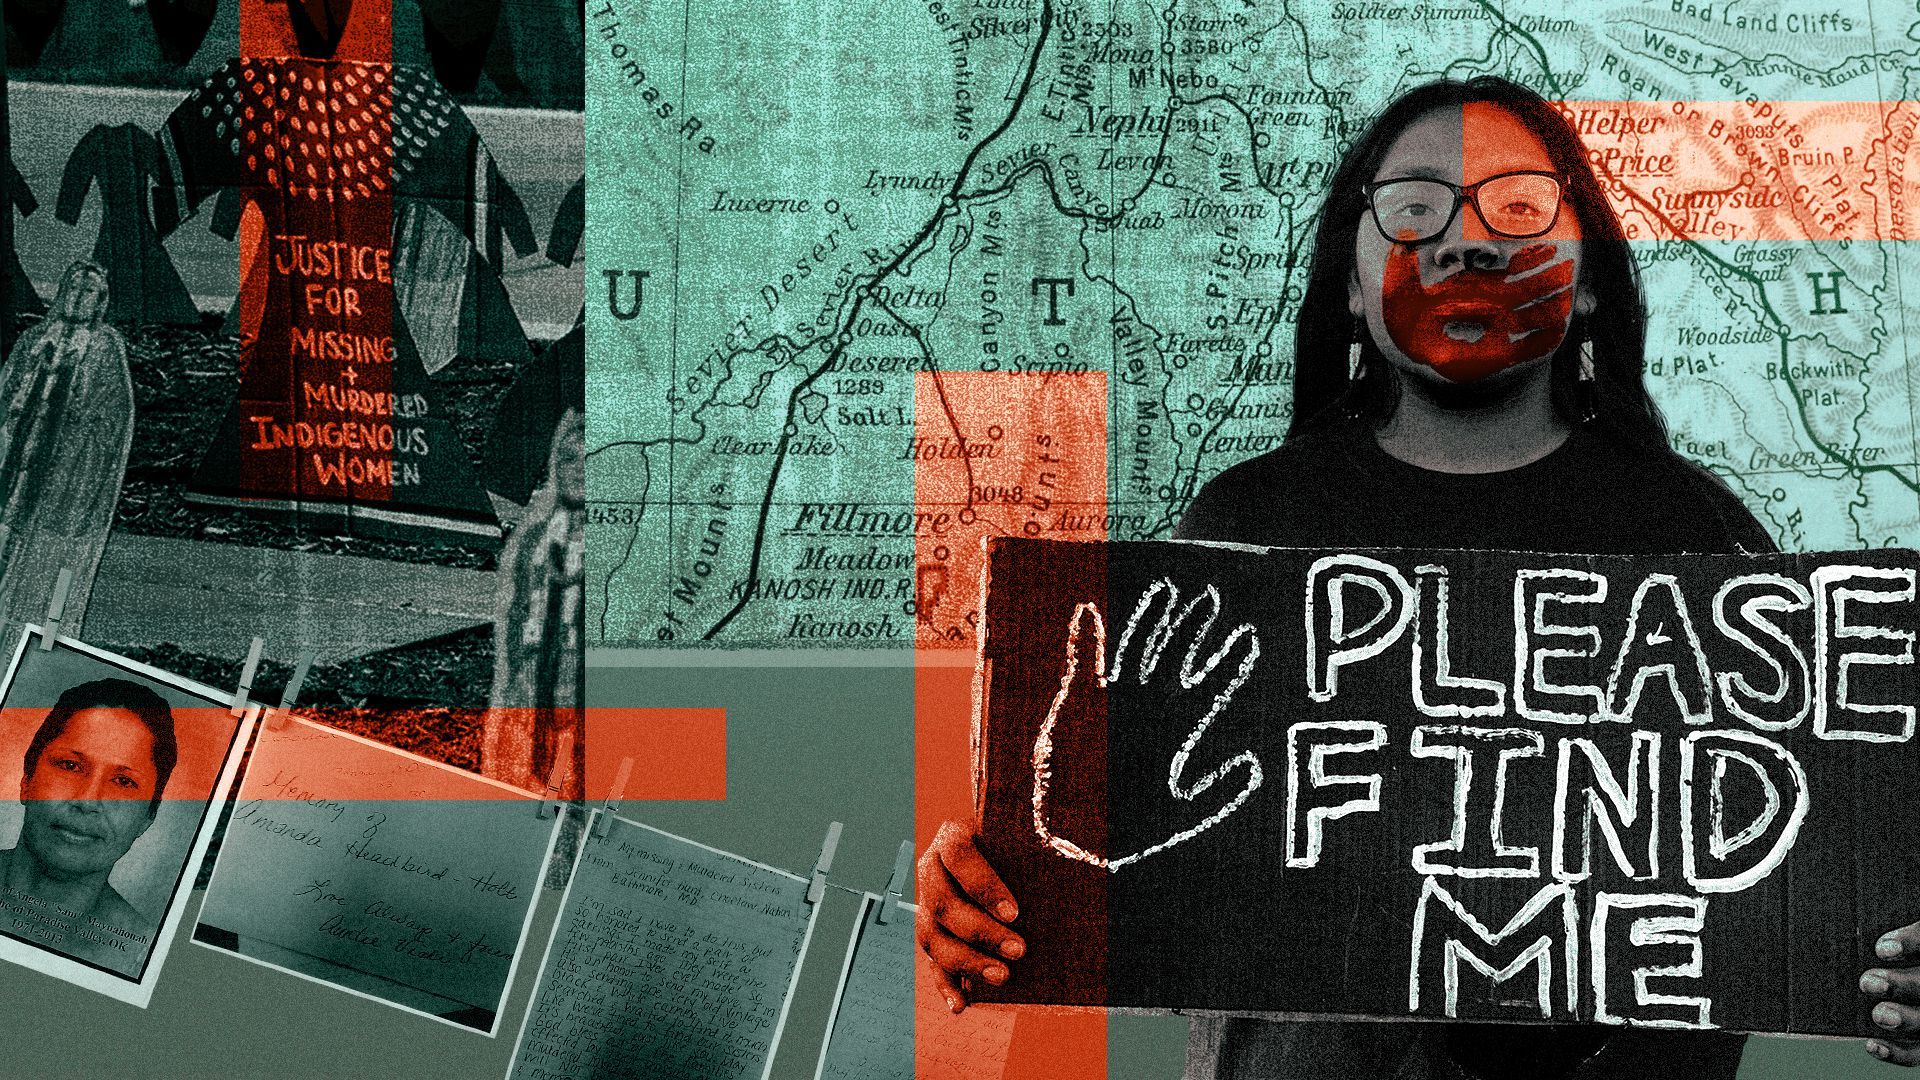 Illustration of an Indigenous woman holding a "Please Find Me" sign with a map of Utah, protest signs, and missing people photos in the background.